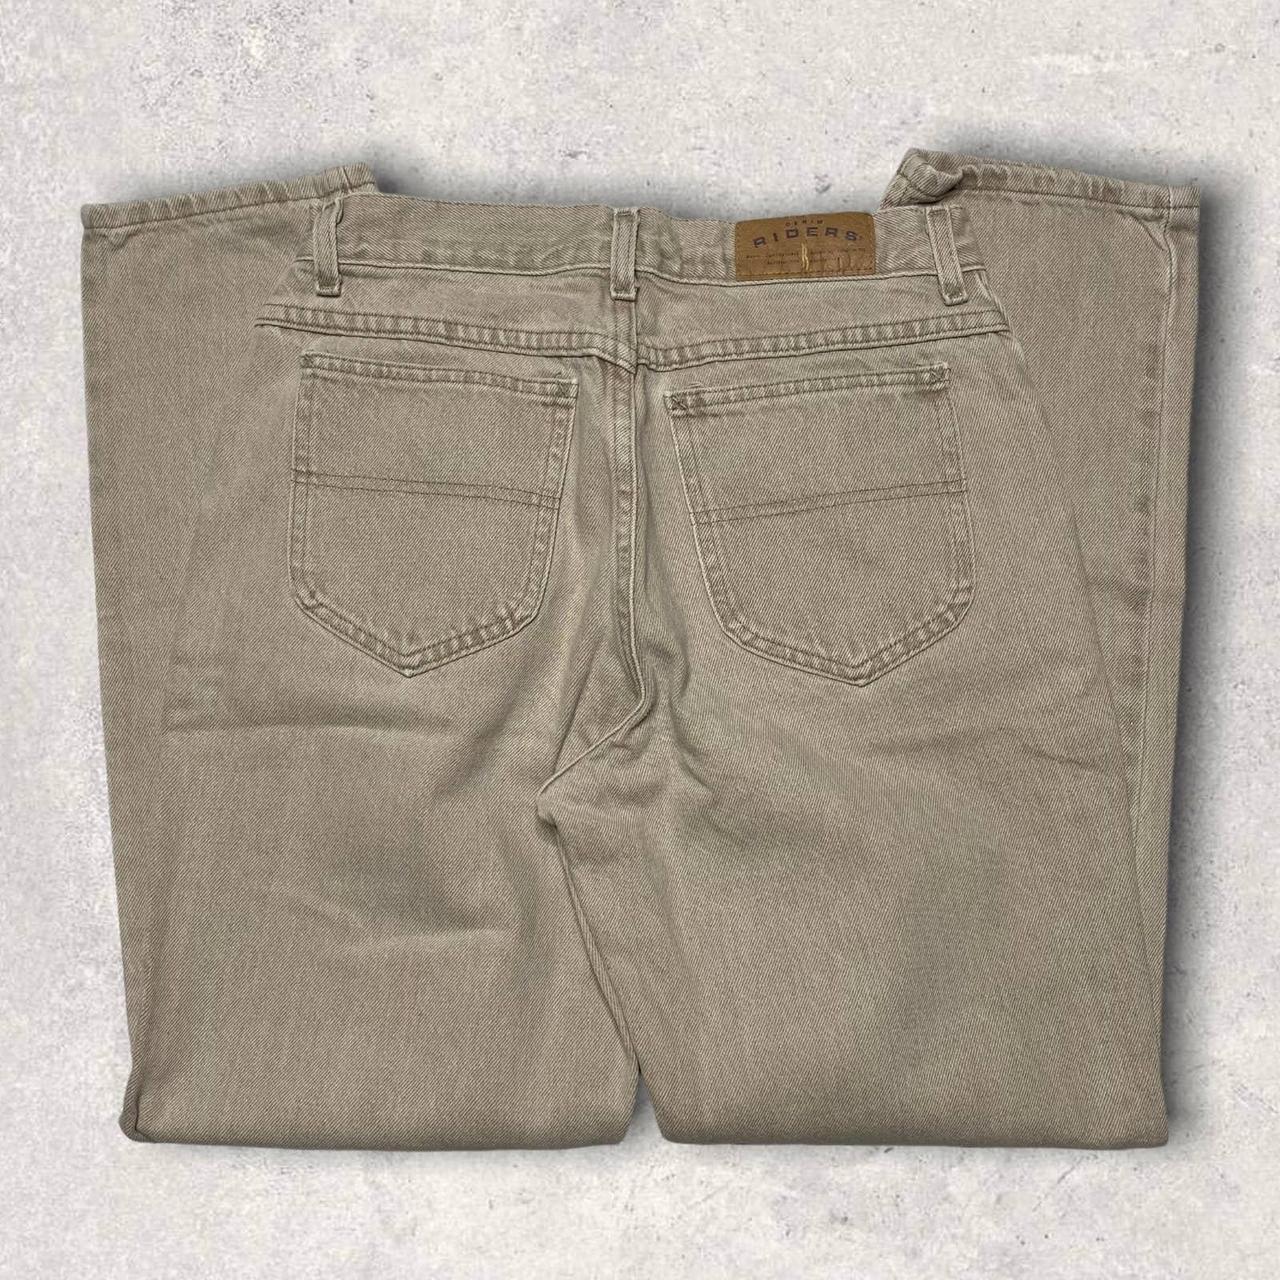 Vintage Tan Lee Riders Relaxed Fit Jeans Tapered... - Depop